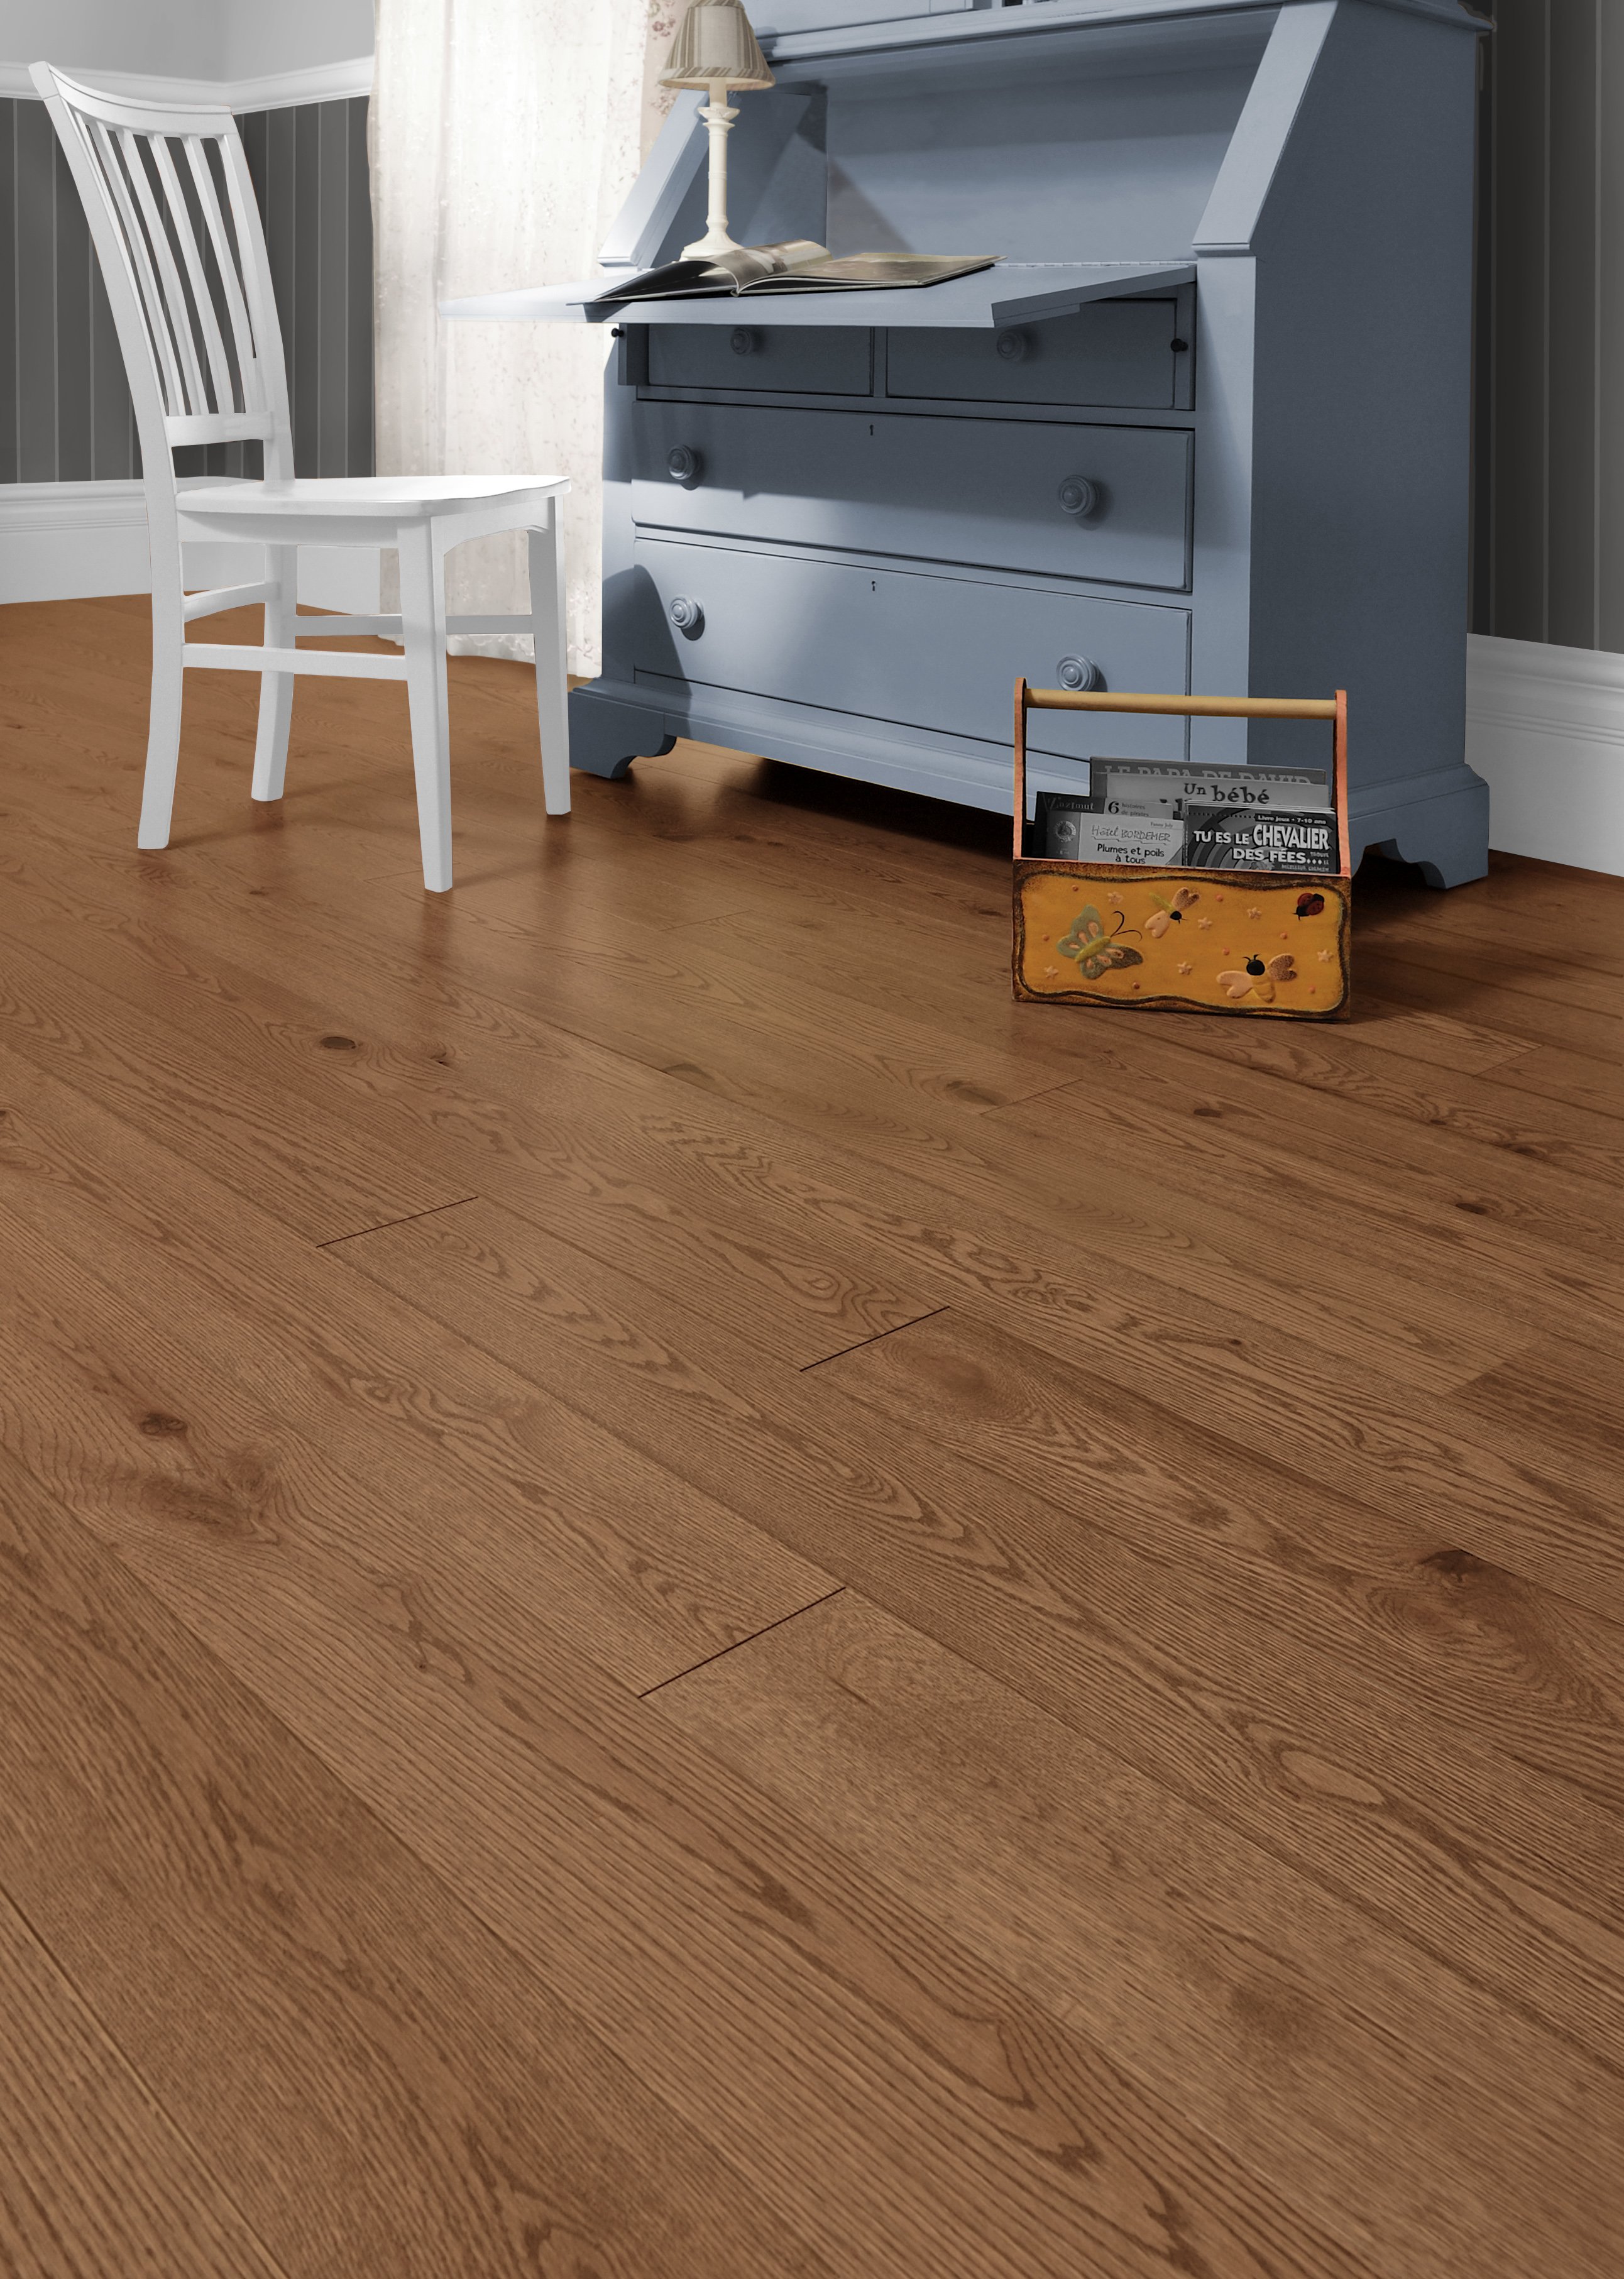 Red Oak Carmel Character Brushed - Ambience image